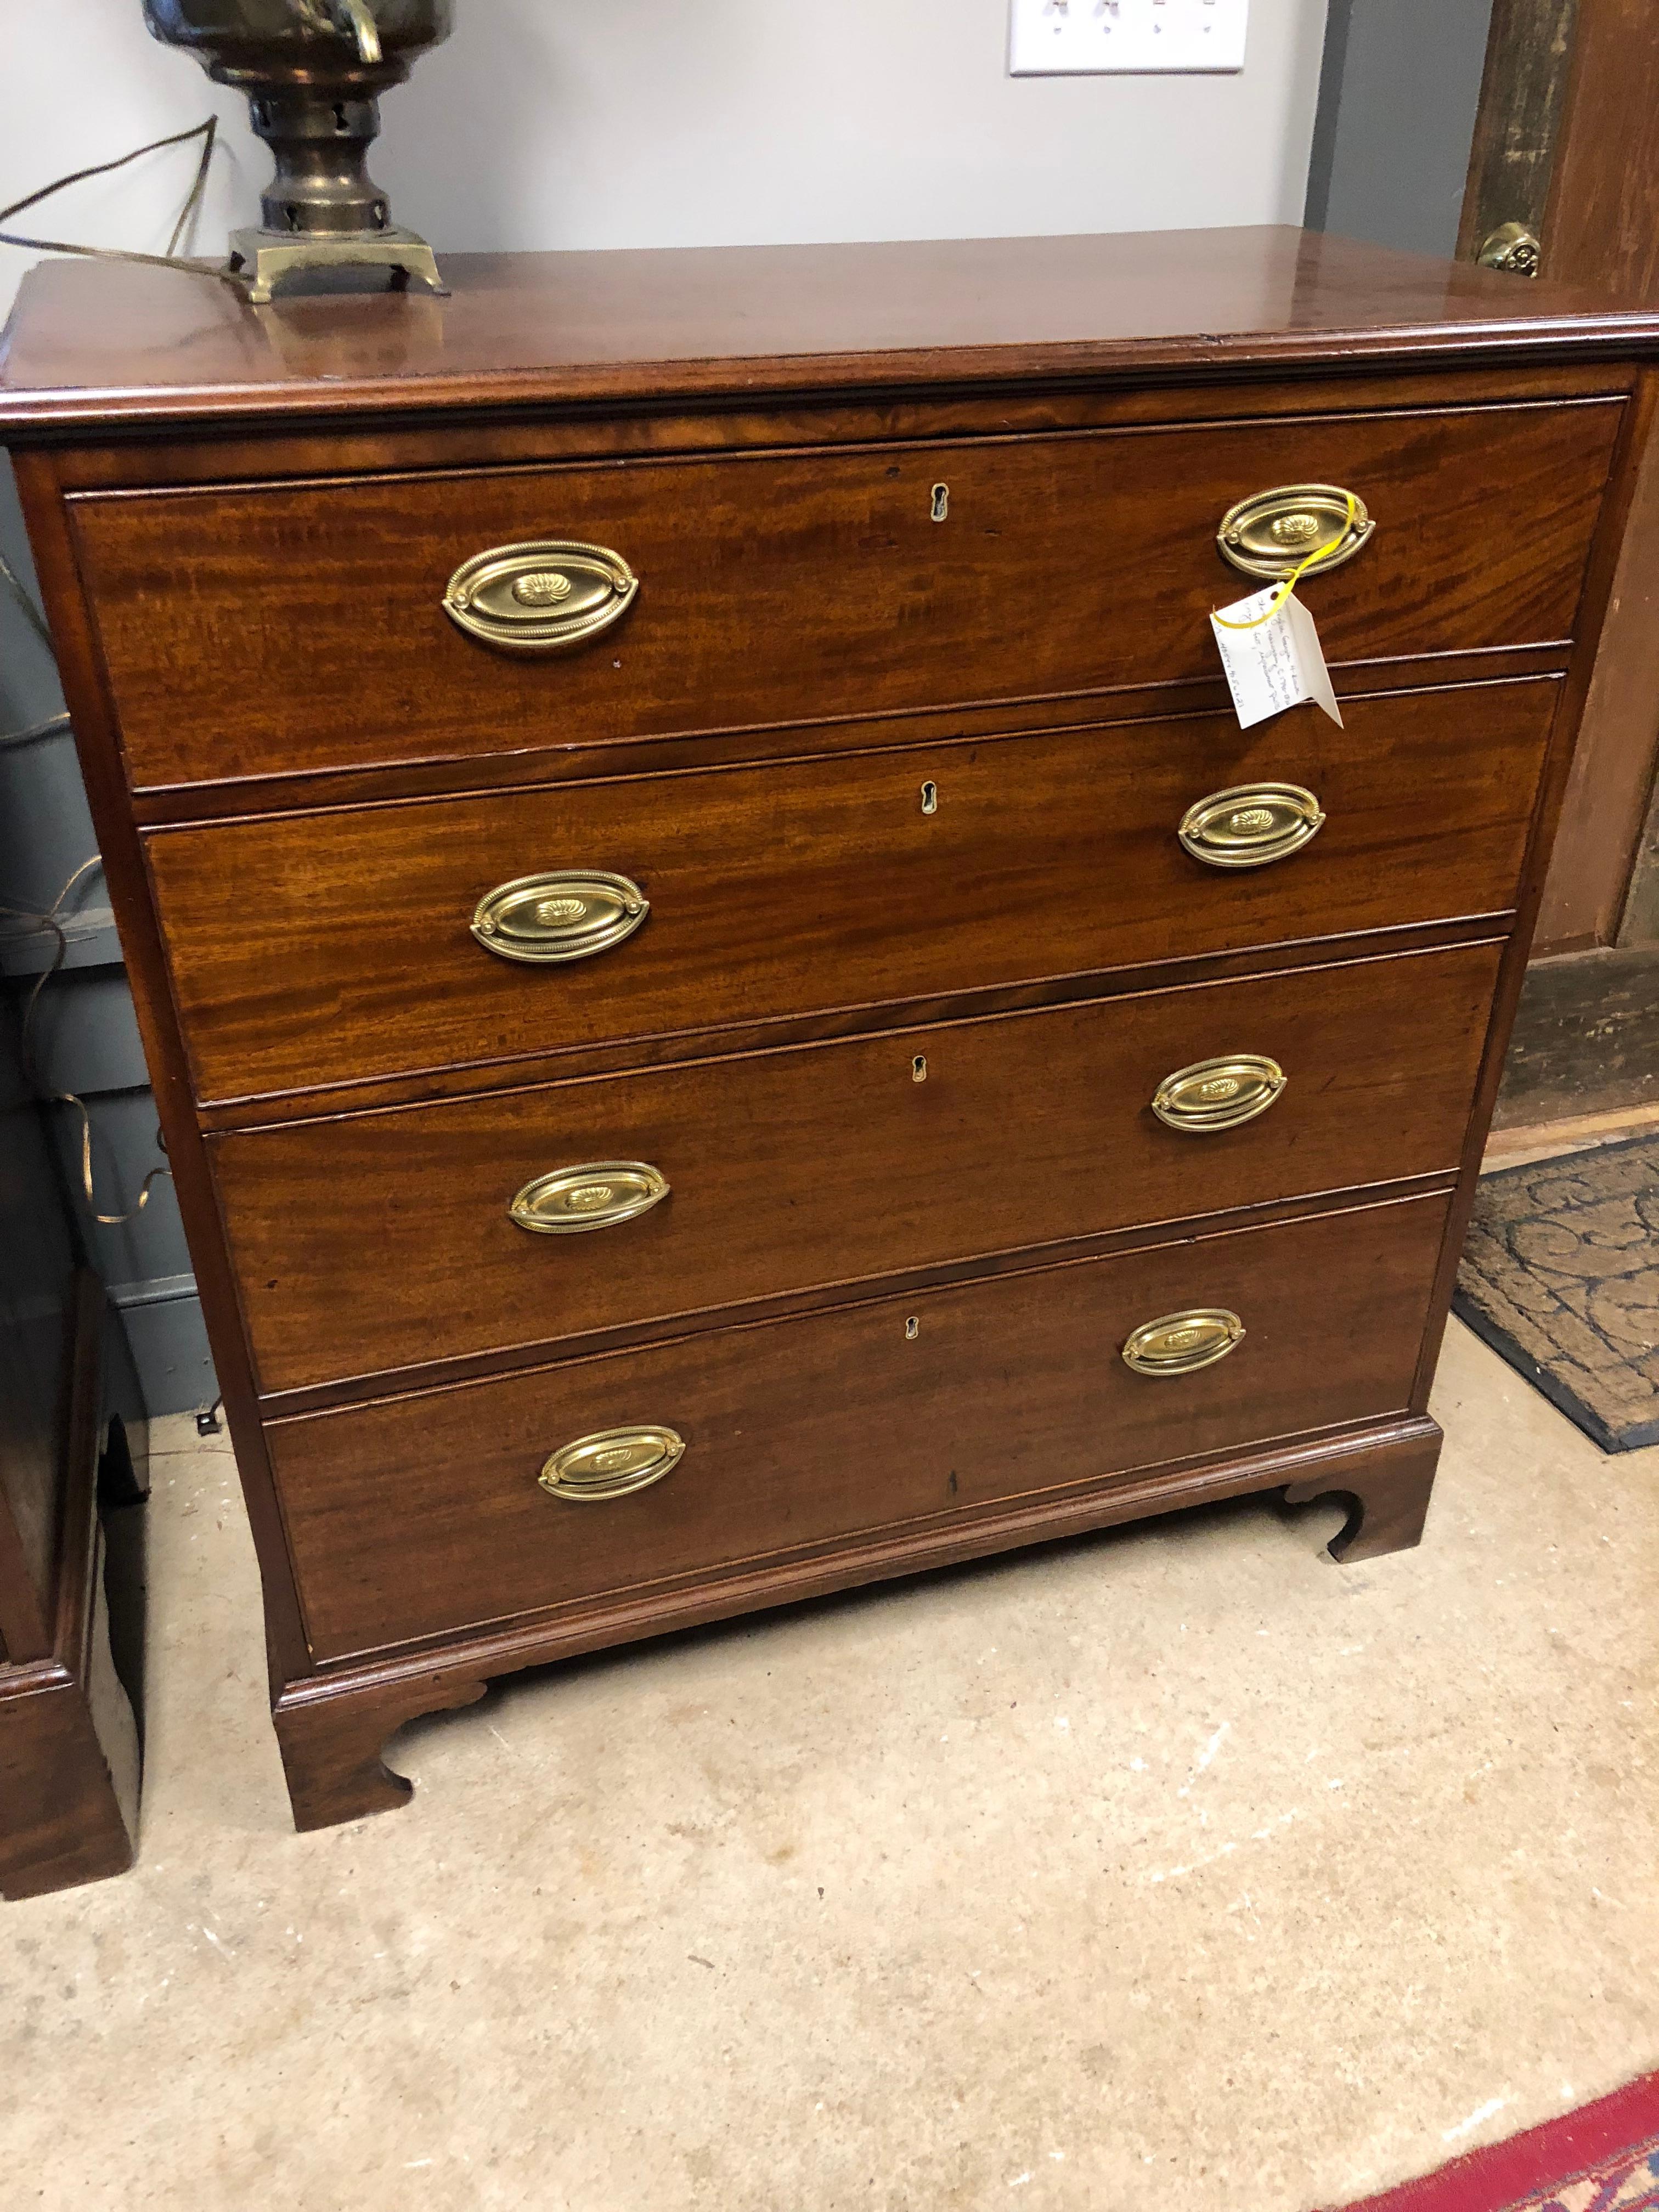 English 4-drawer chest, Georgian, mahogany, very original, good storage chest, nice lighter color, traditional, drawers work well, a nice vertical size. Early, replacement brasses.